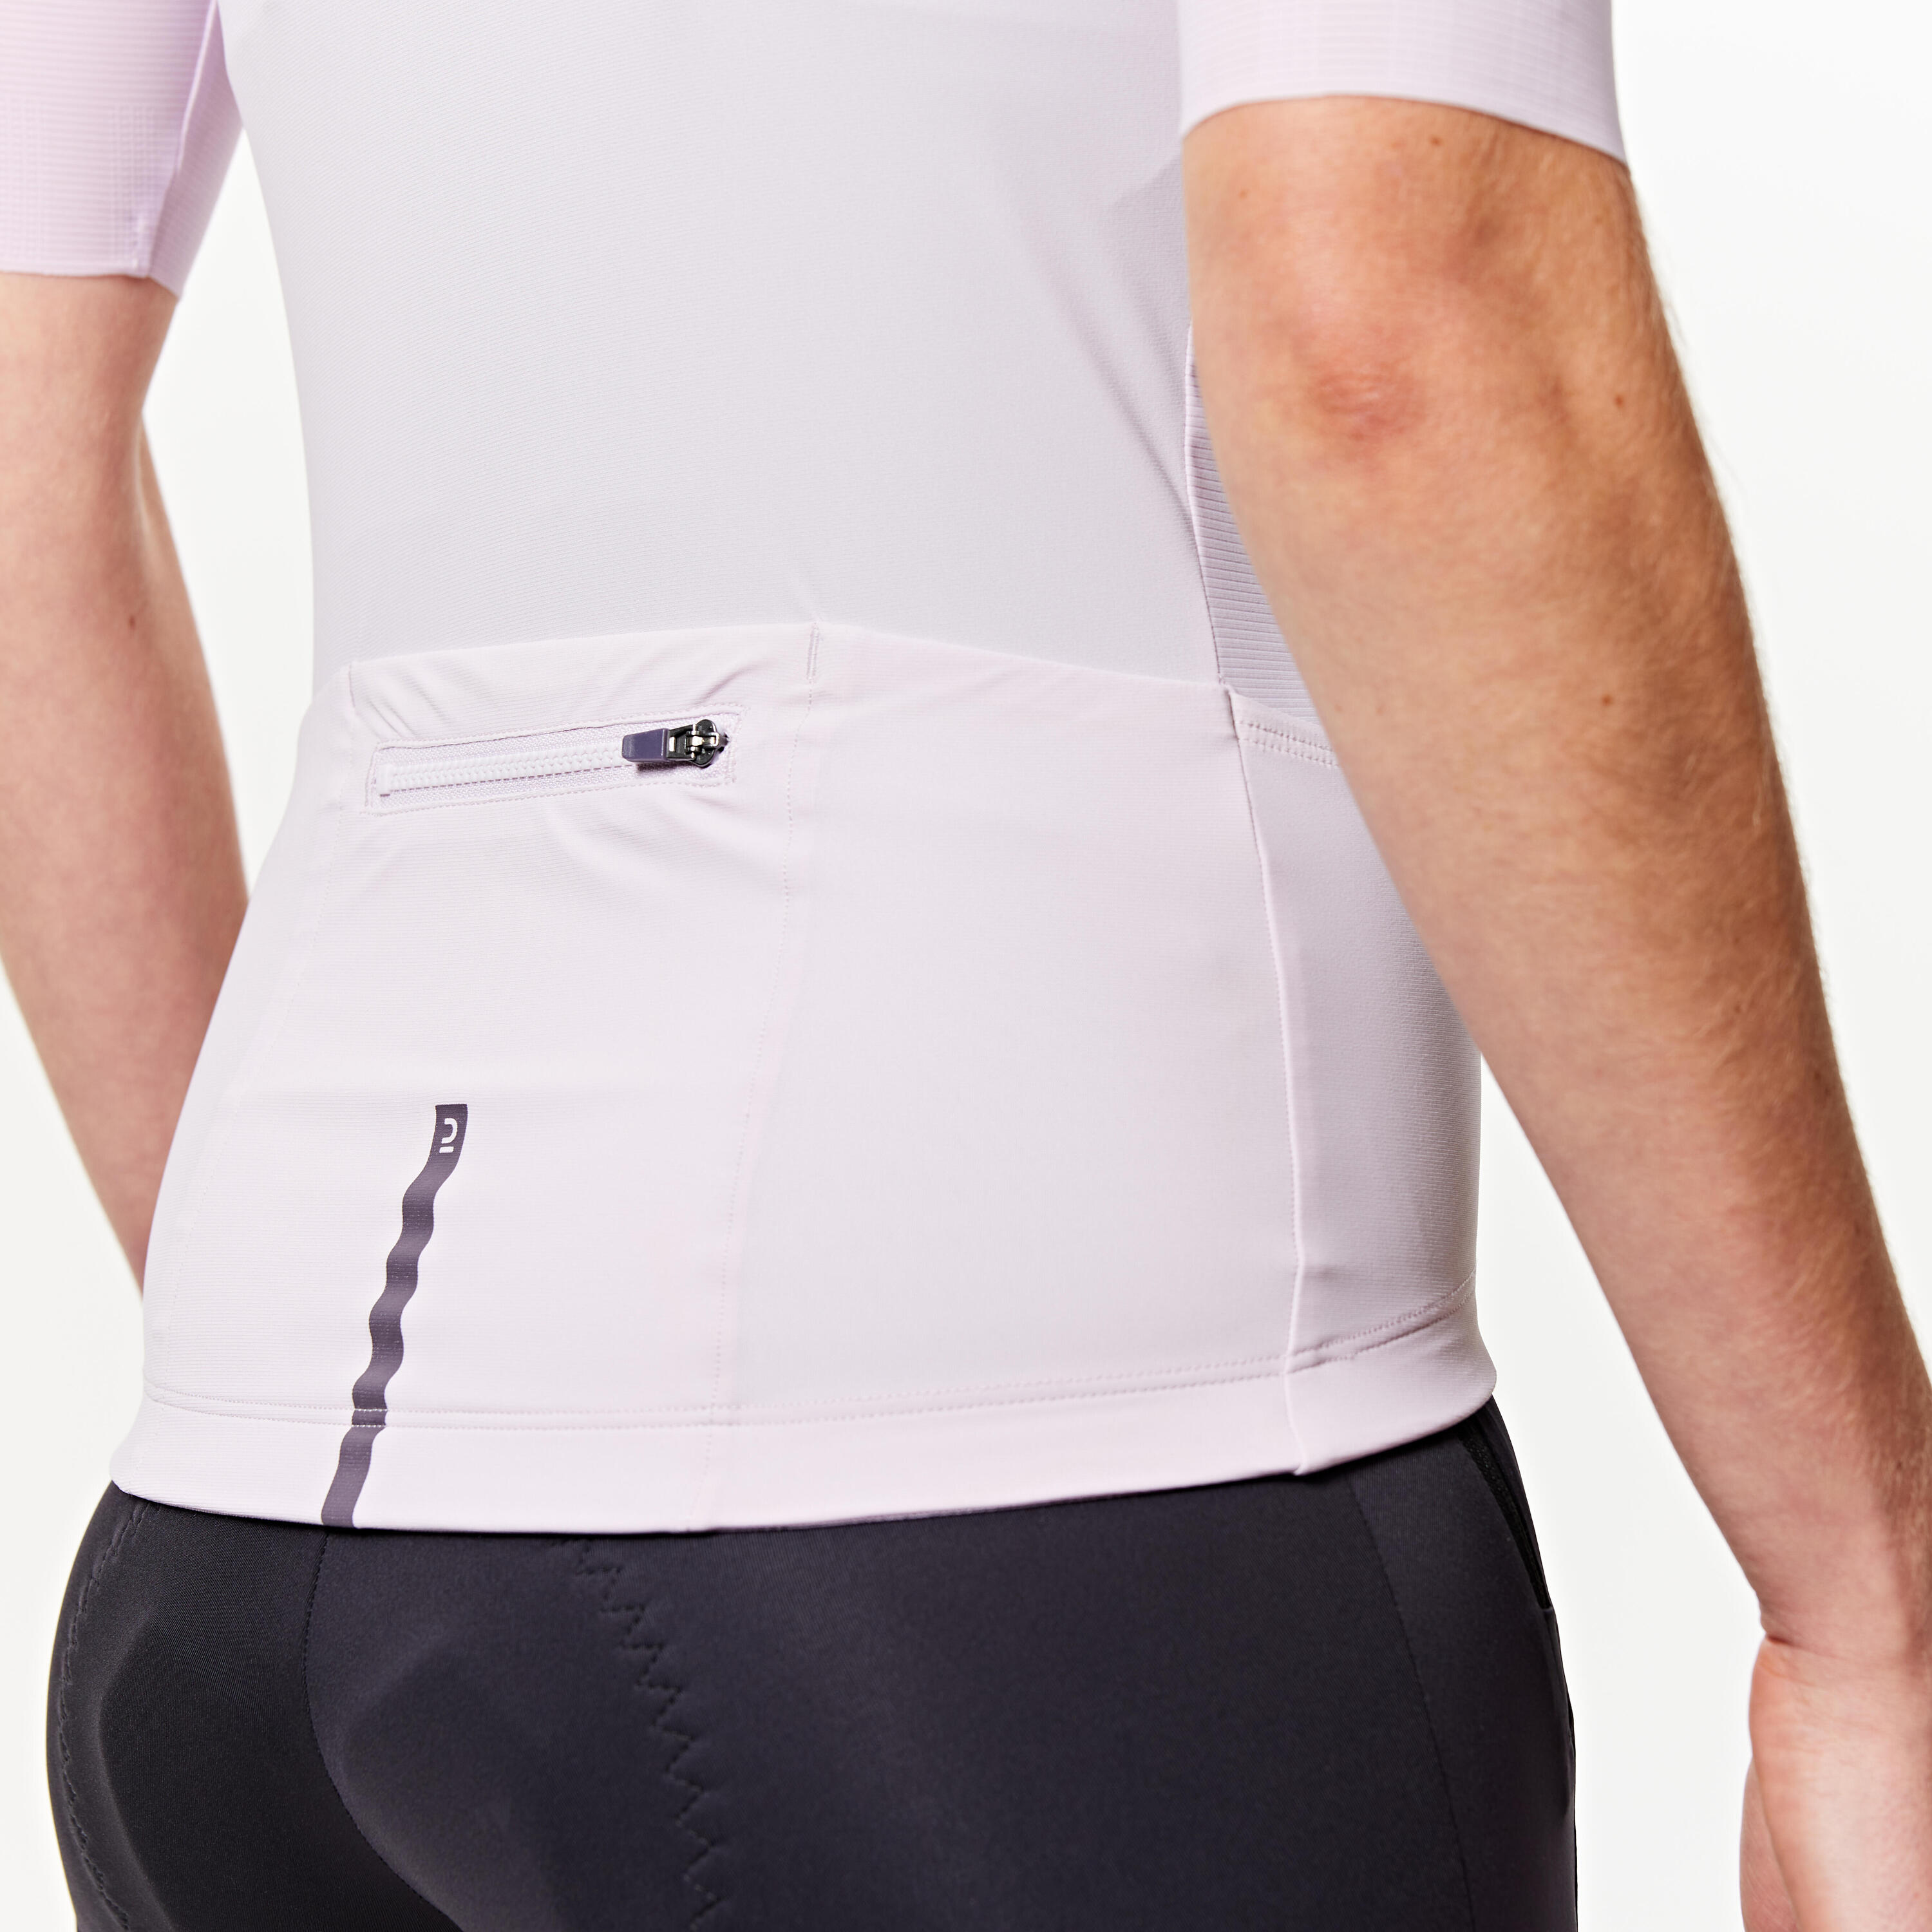 Unisex Road Cycling Short-Sleeved Summer Jersey Racer 2 4/8